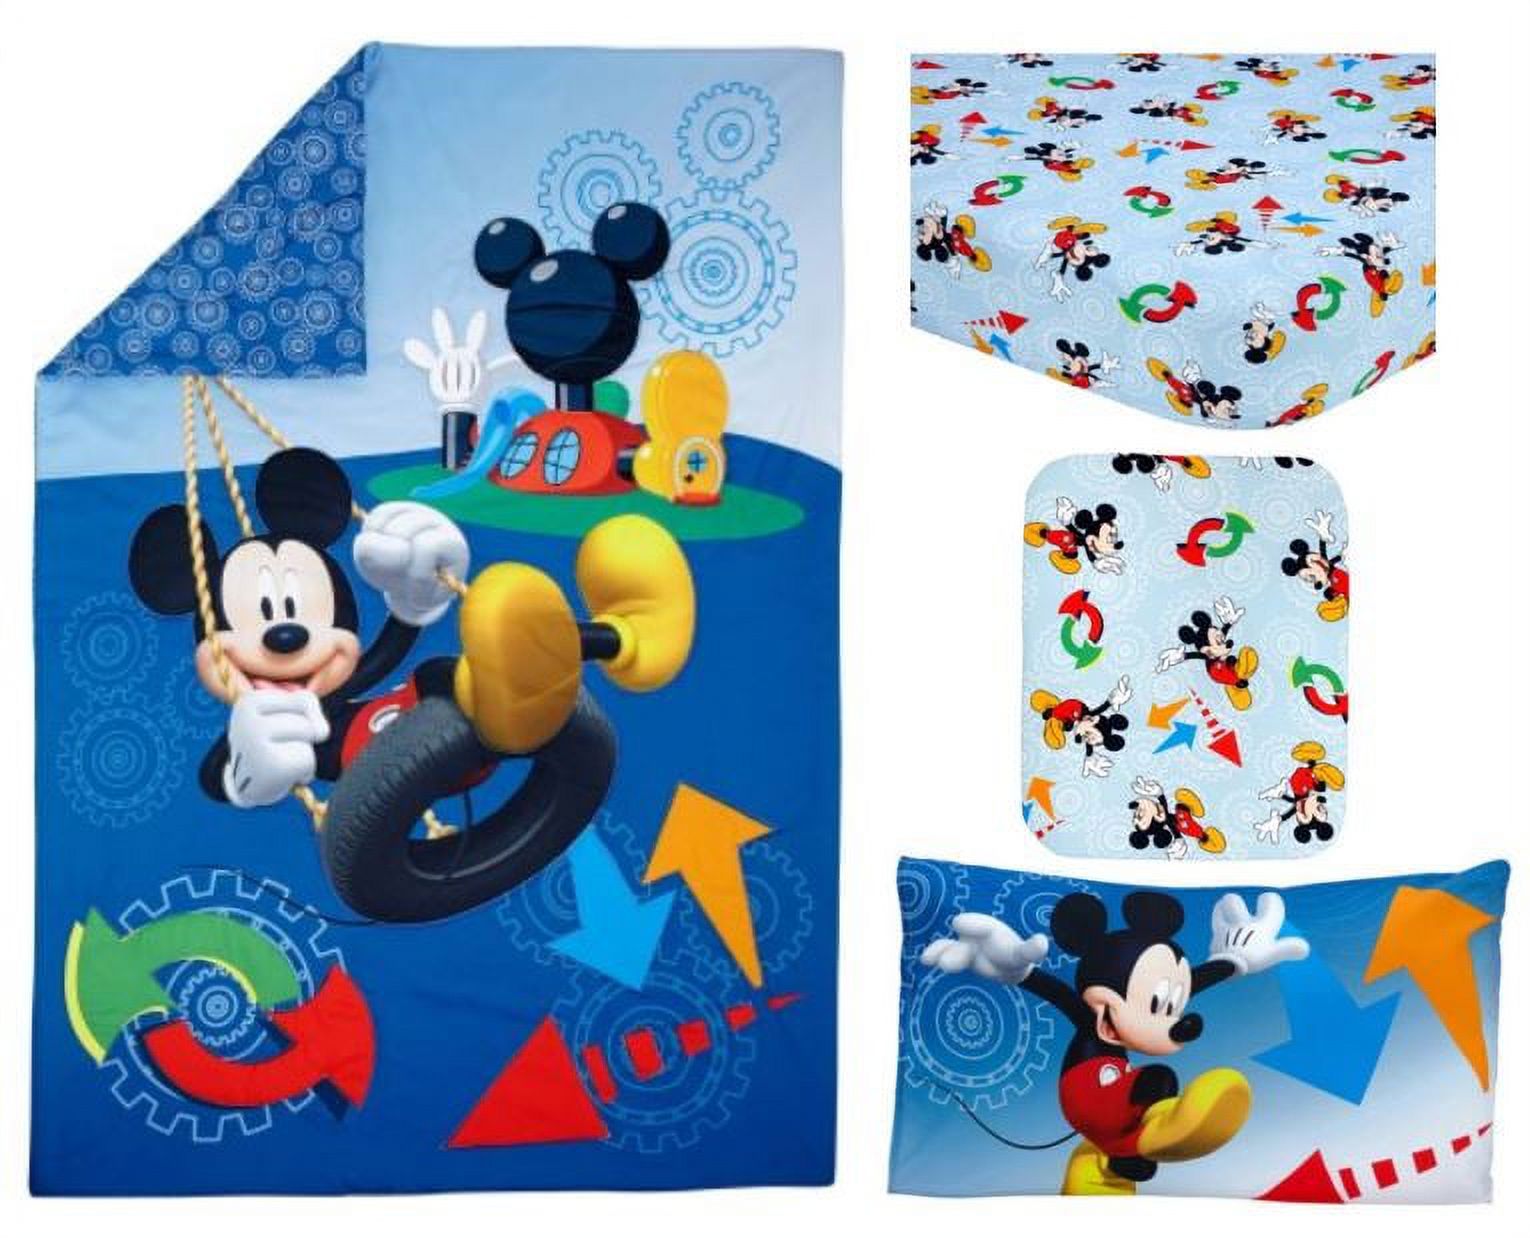 Disney Mickey Mouse Adventure Day 4-Piece Toddler Bedding Set - image 1 of 8